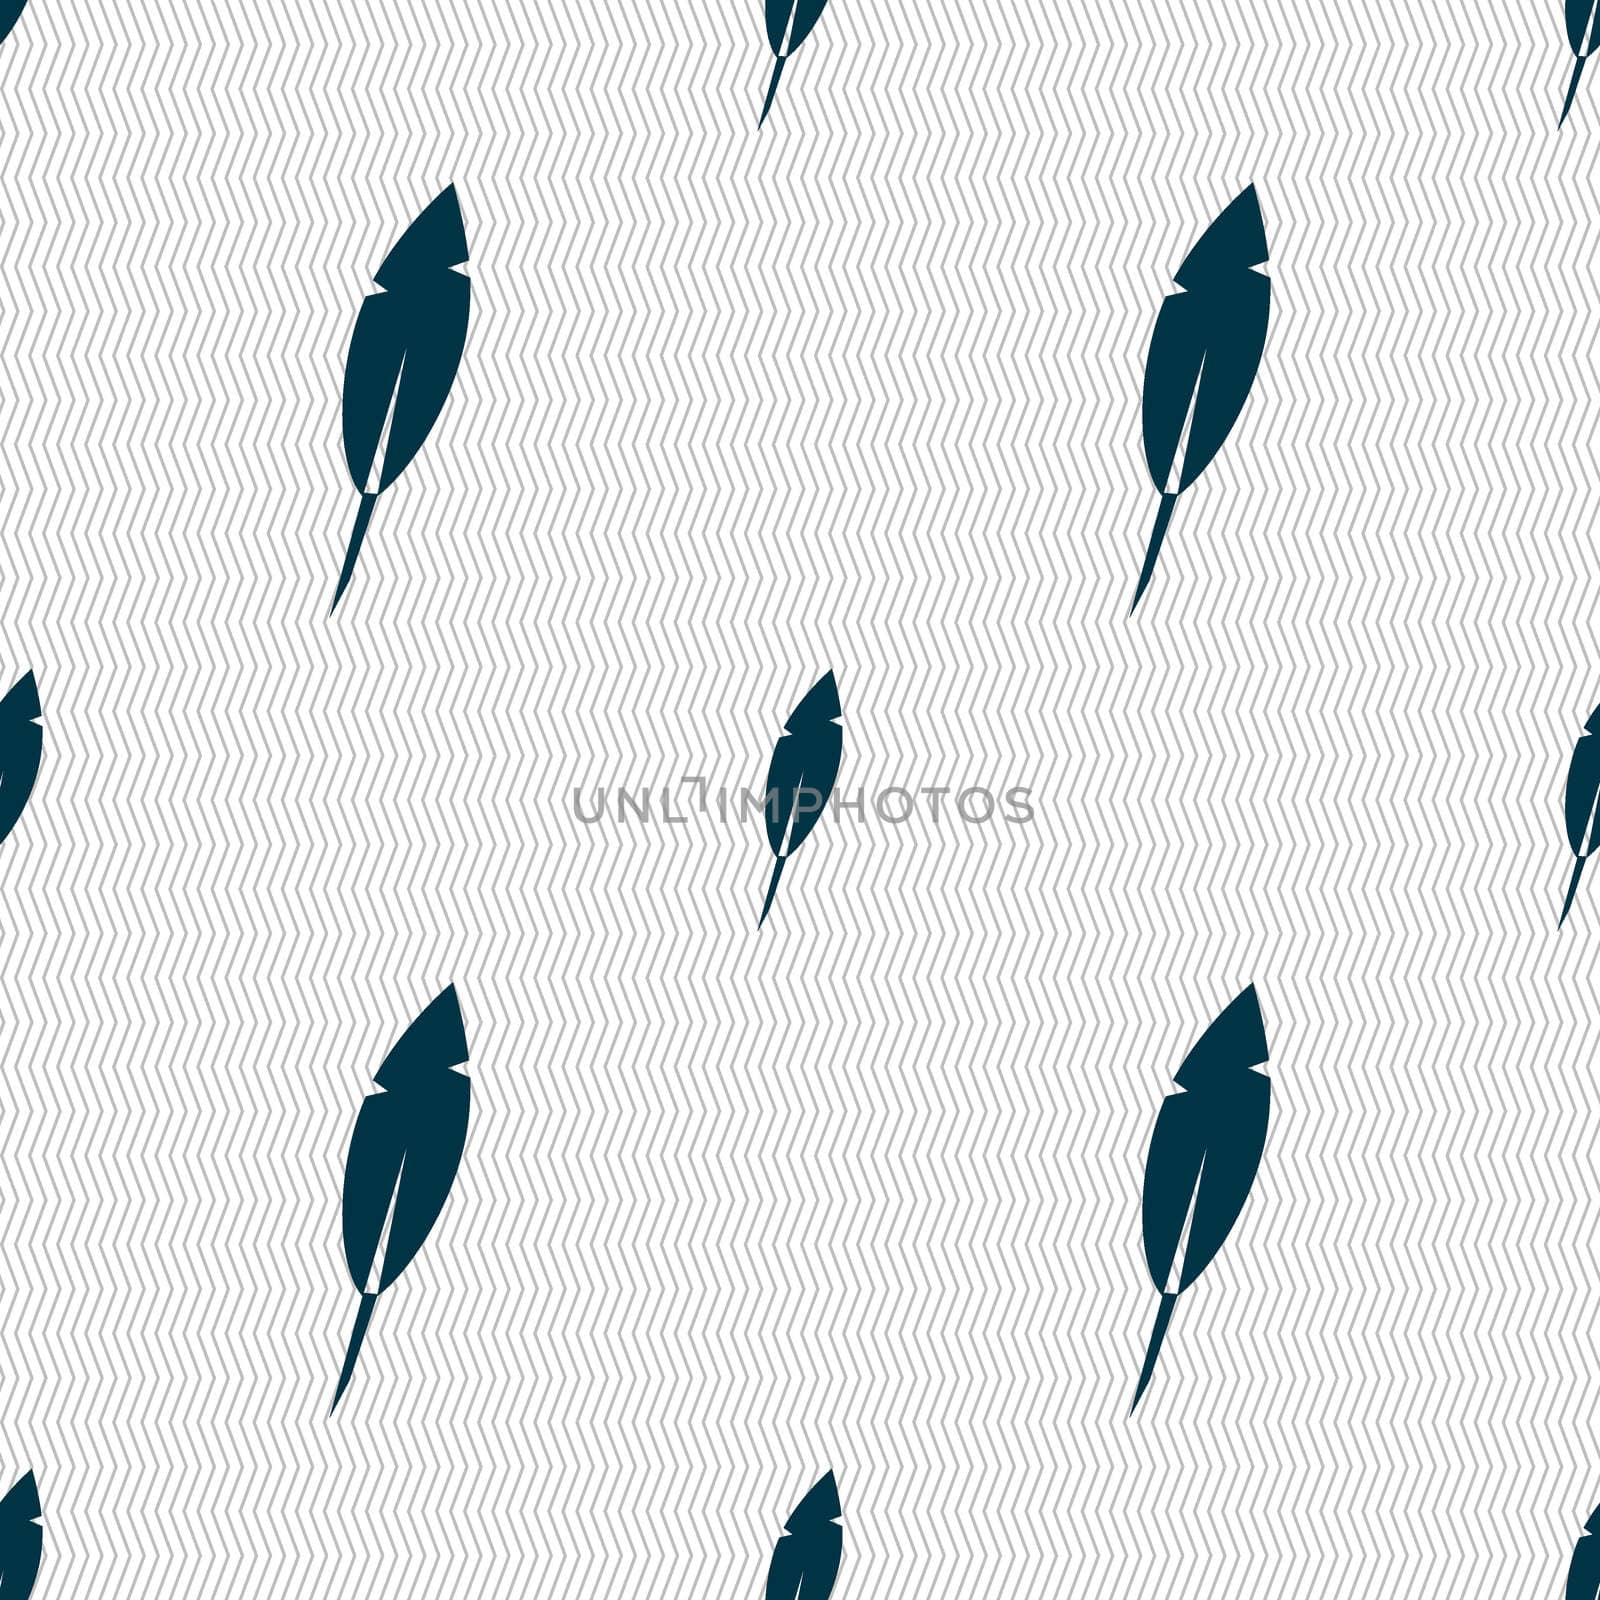 Feather sign icon. Retro pen symbo. Seamless abstract background with geometric shapes. illustration